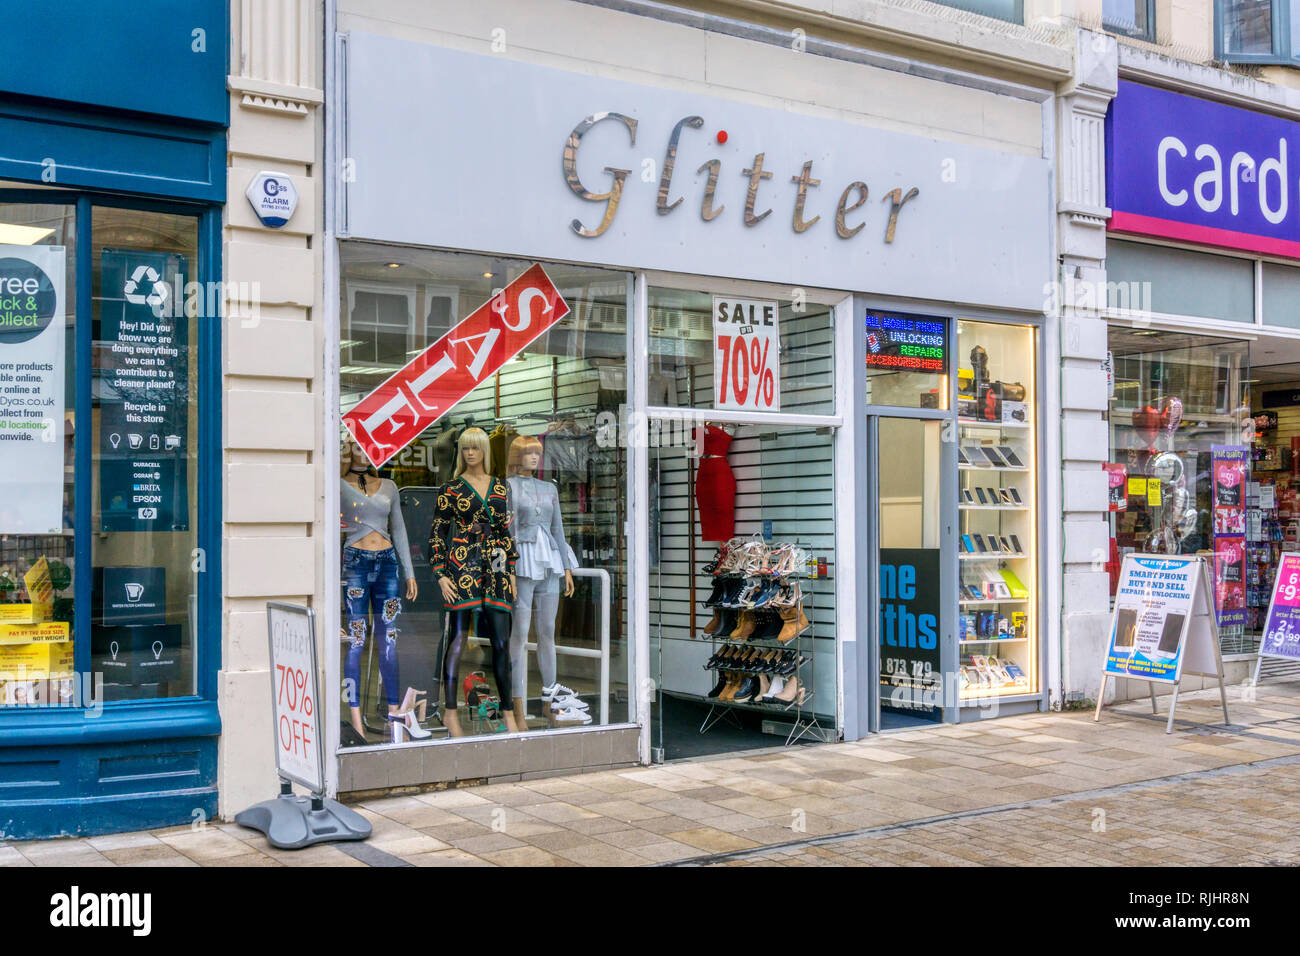 Glitter womens clothing shop in Bromley High Street, South London. Stock Photo